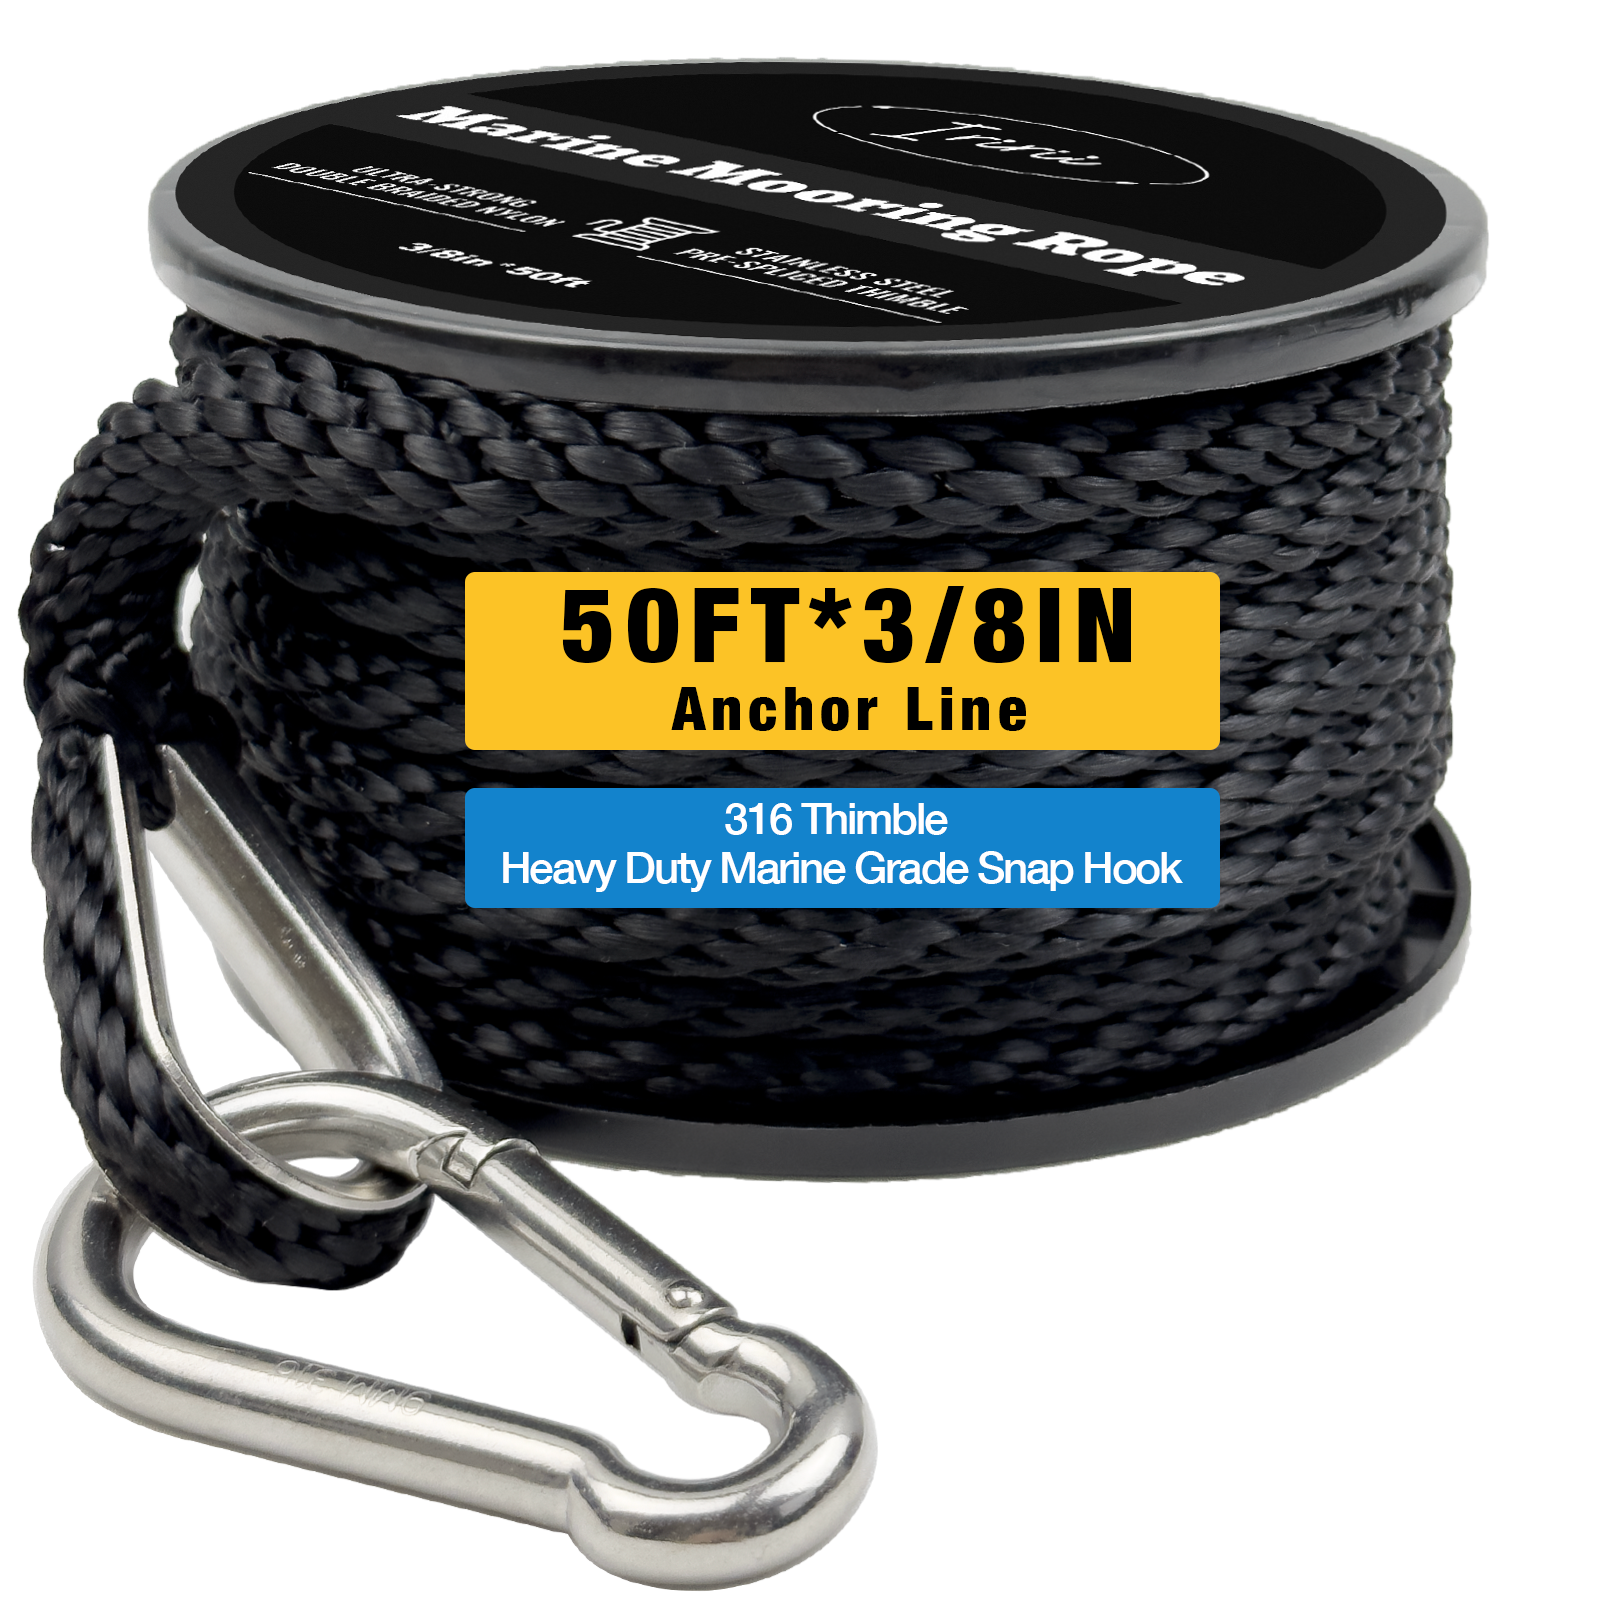 50FT Double Braided Nylon Boat Anchor Rope 3/8inch with 316